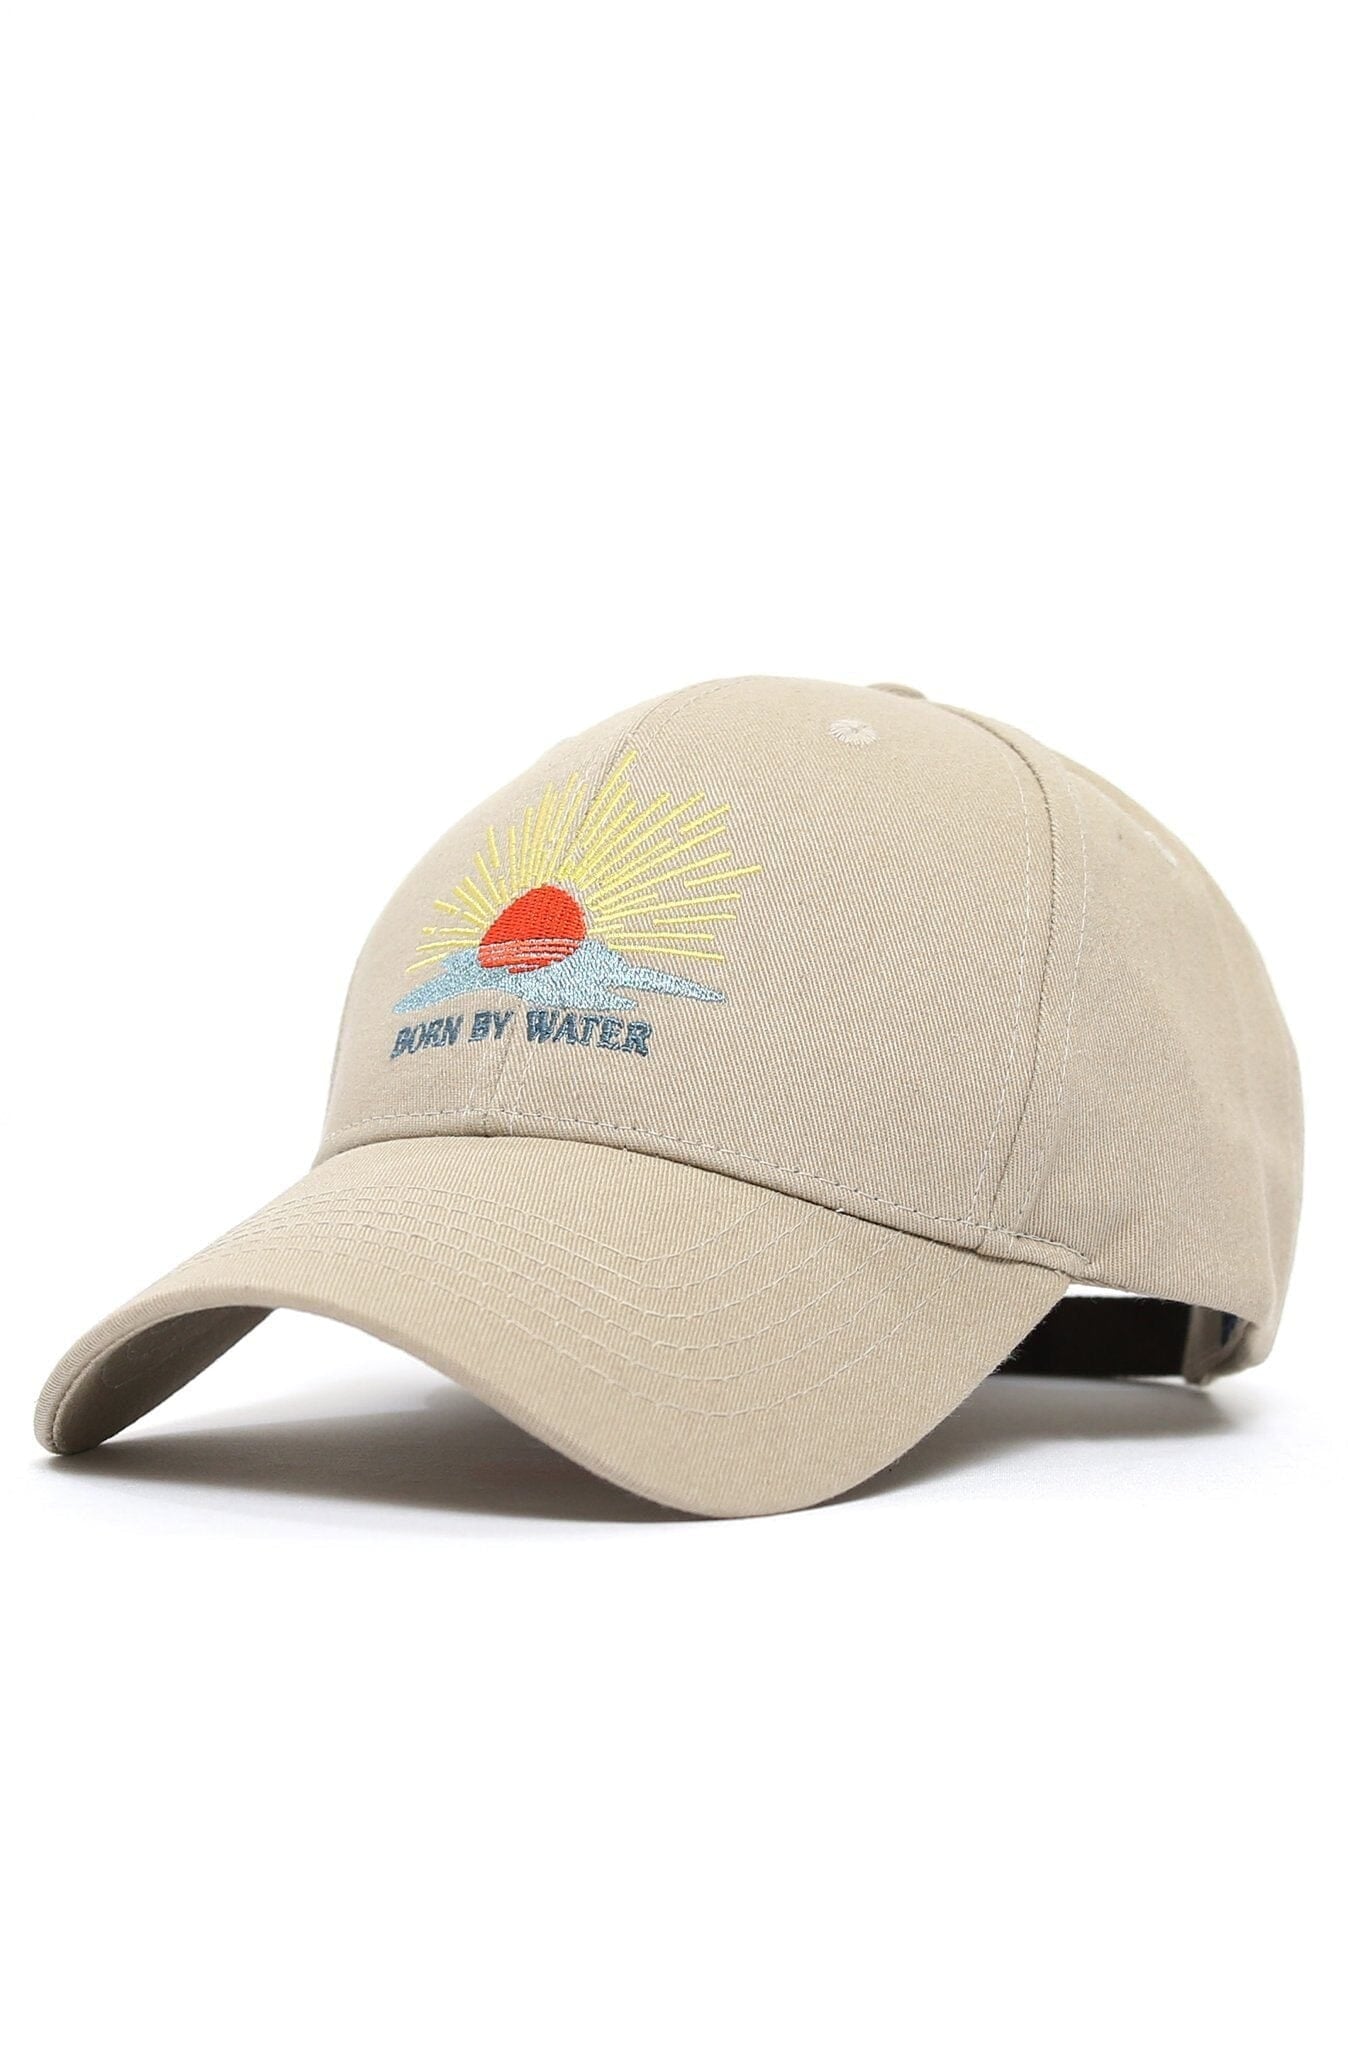 BORN BY WATER SUNSET CAP - OS -